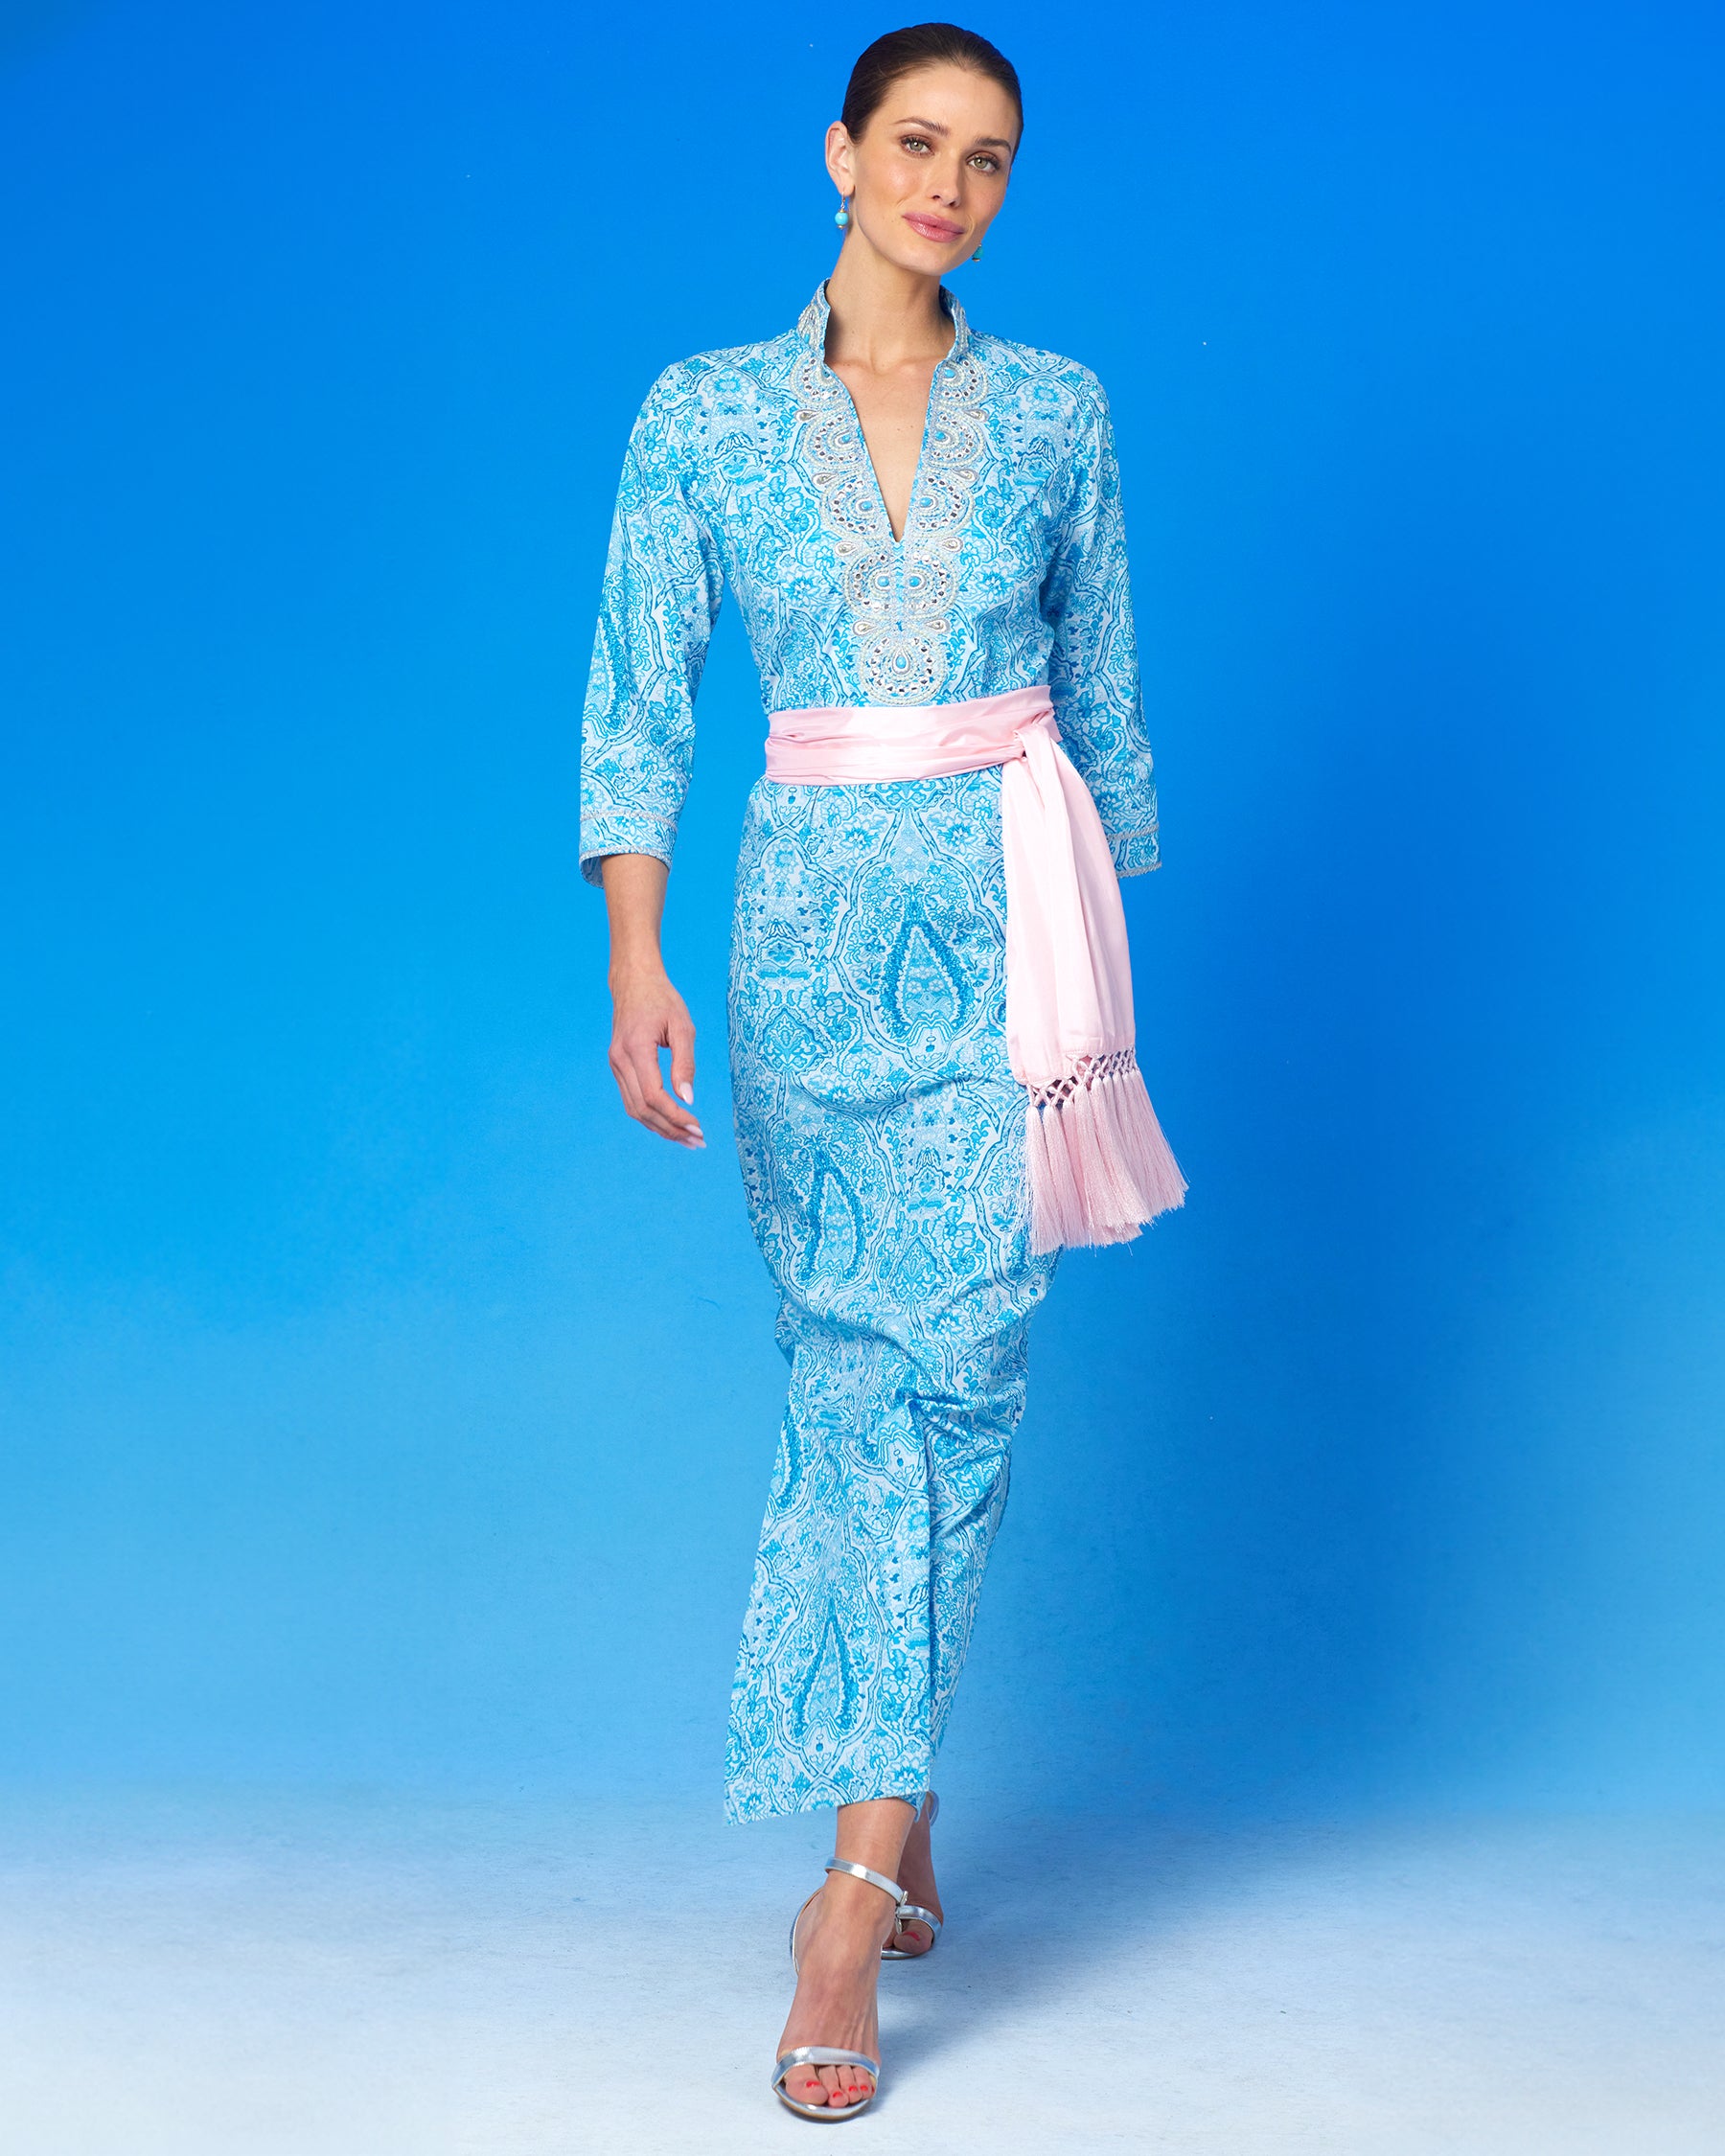 Cosima Sash Belt in Blush Pink worn with the Noor Long Tunic Dress in Turquoise Paisley